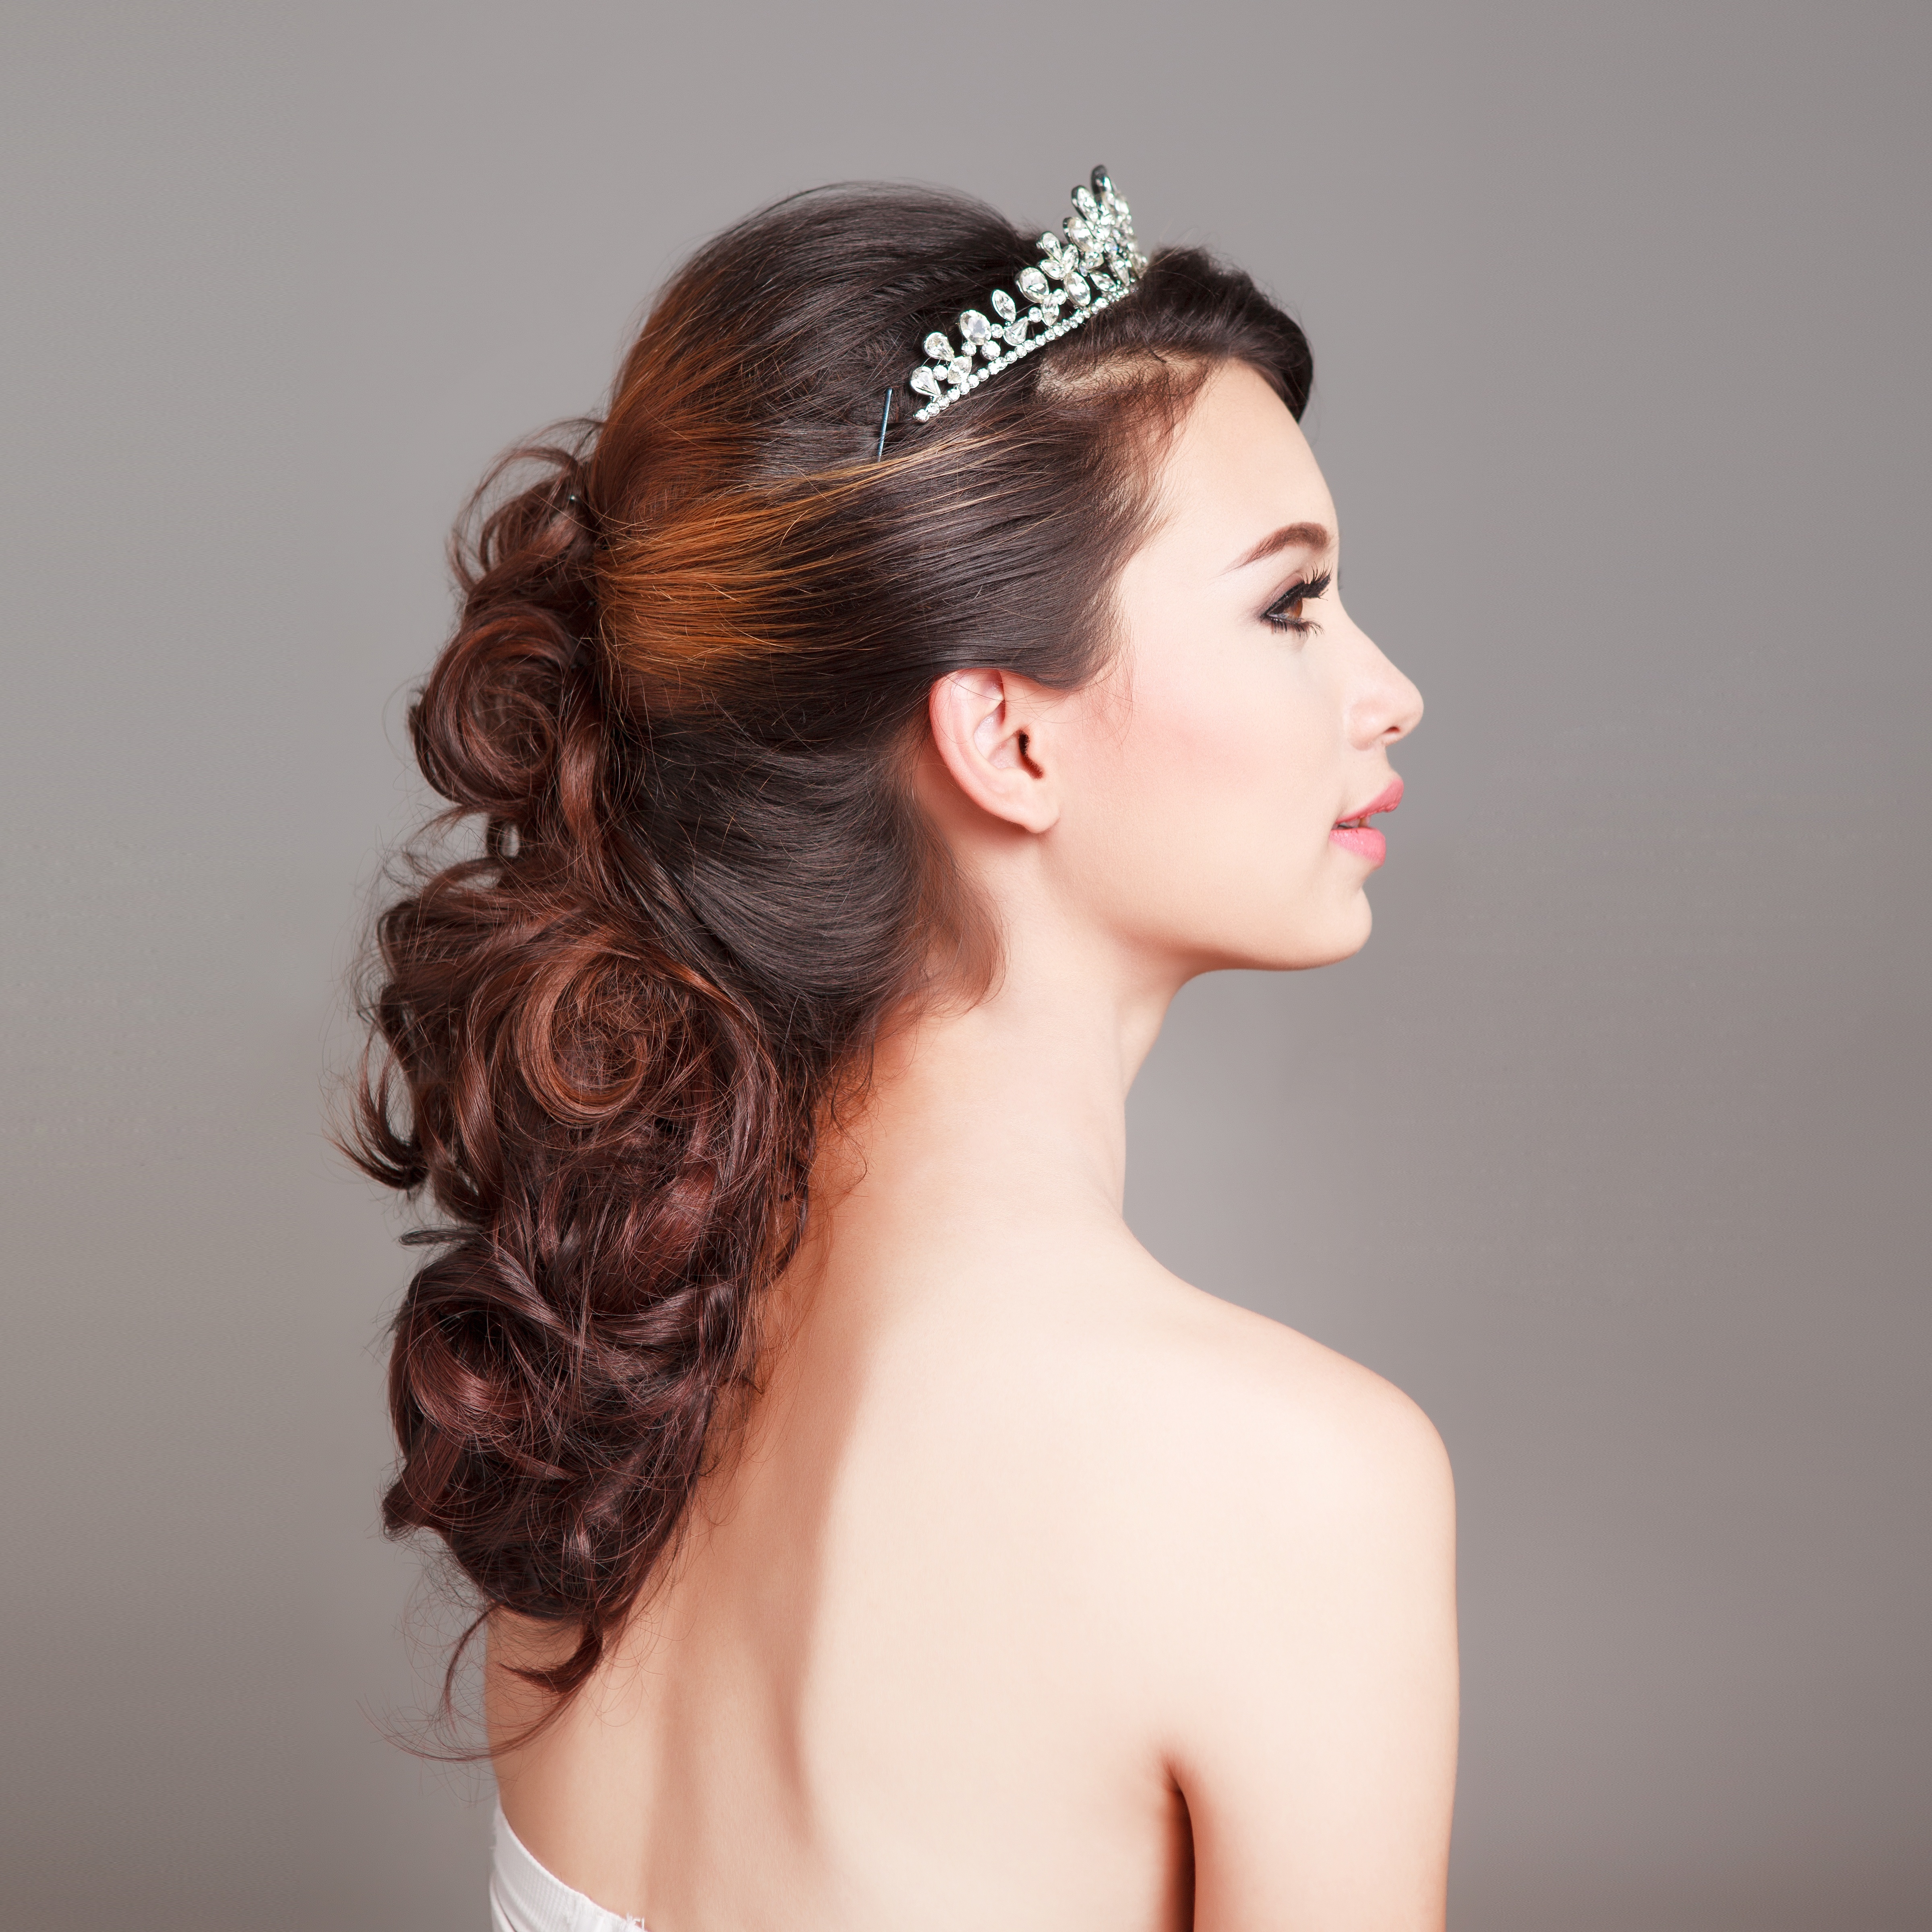 21381885 – bridal make up and hair style in studio shot